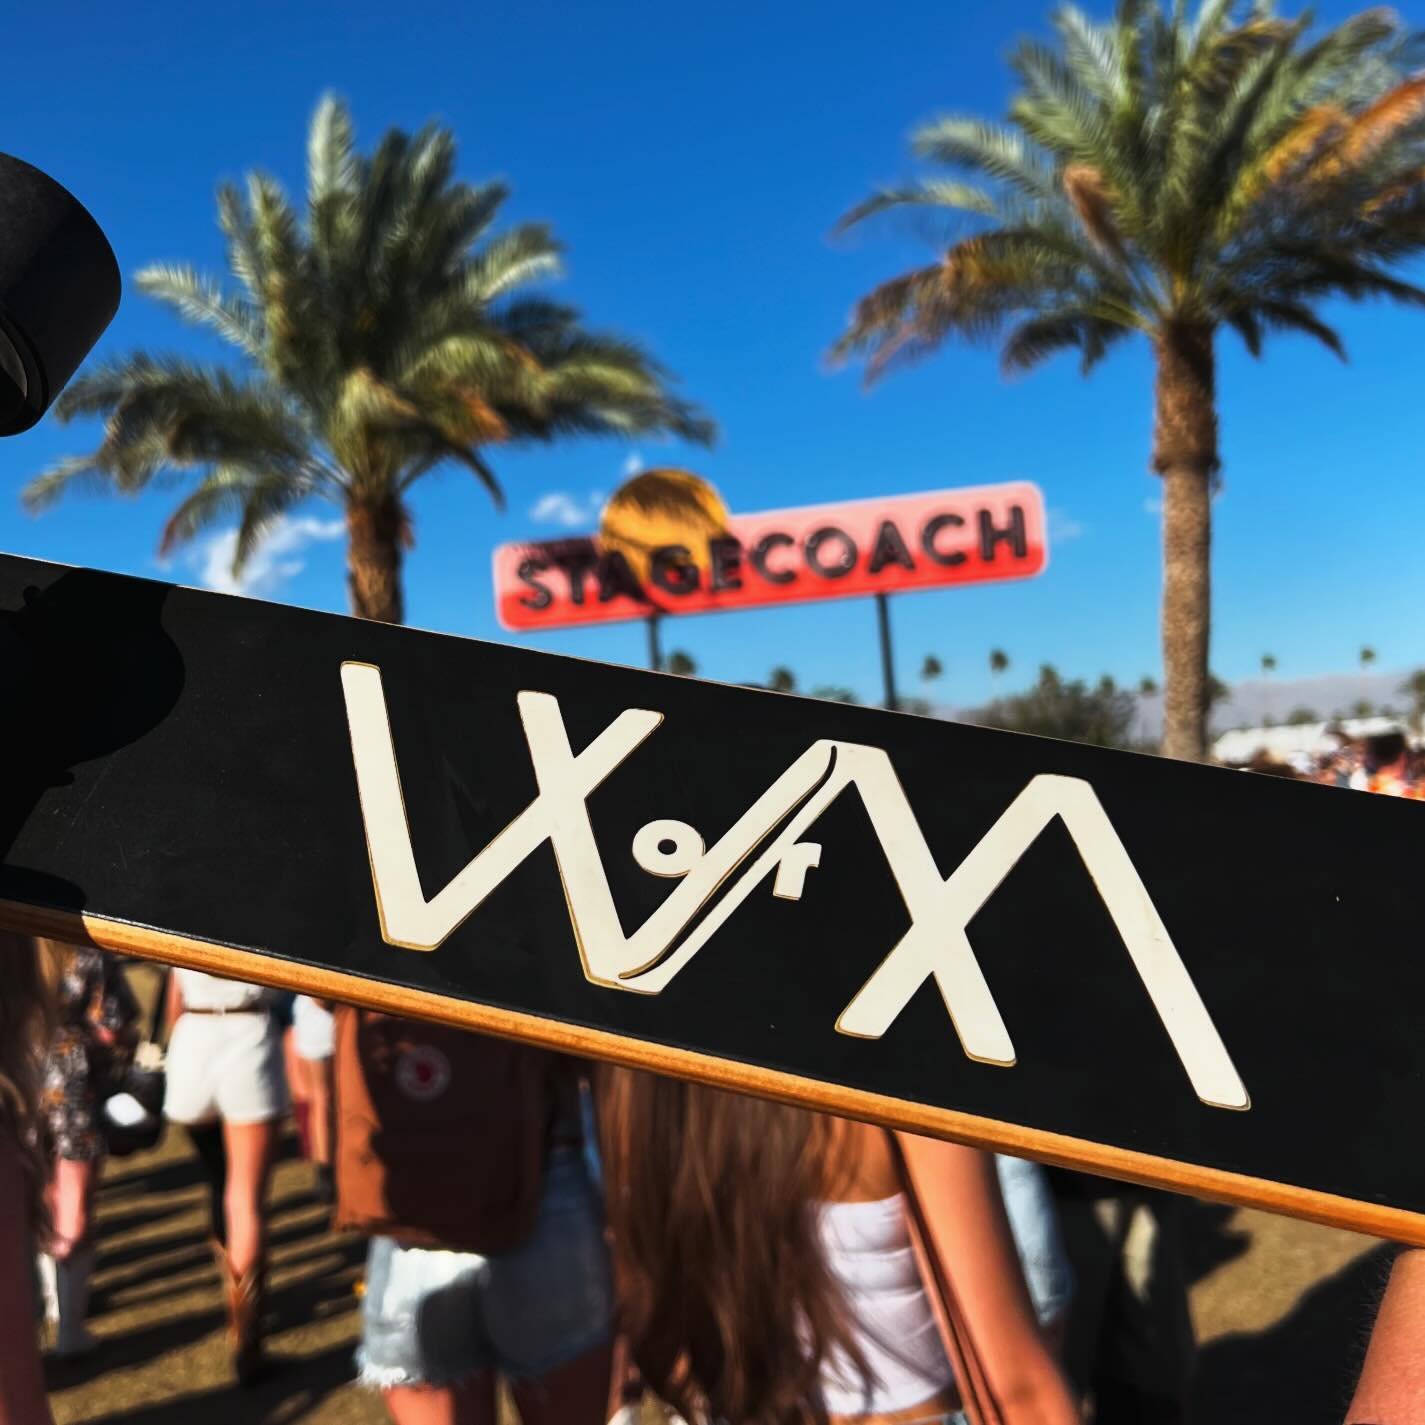 Giddy up!

#WORMBOARDS @stagecoach